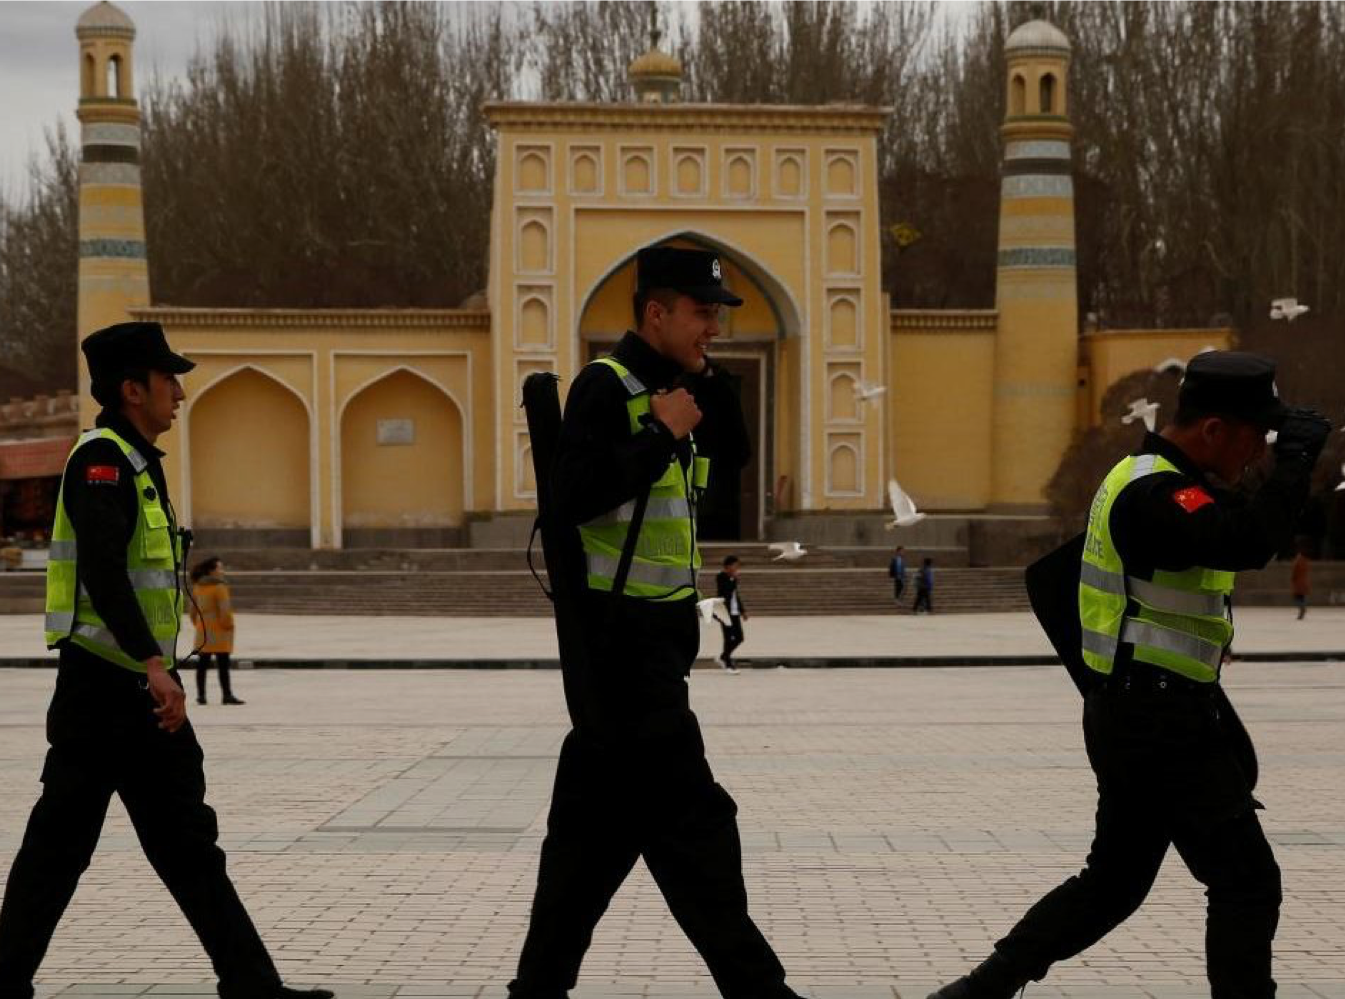 PRESS RELEASE: WUC Highlights Religious Persecution of Uyghurs During Ramadan